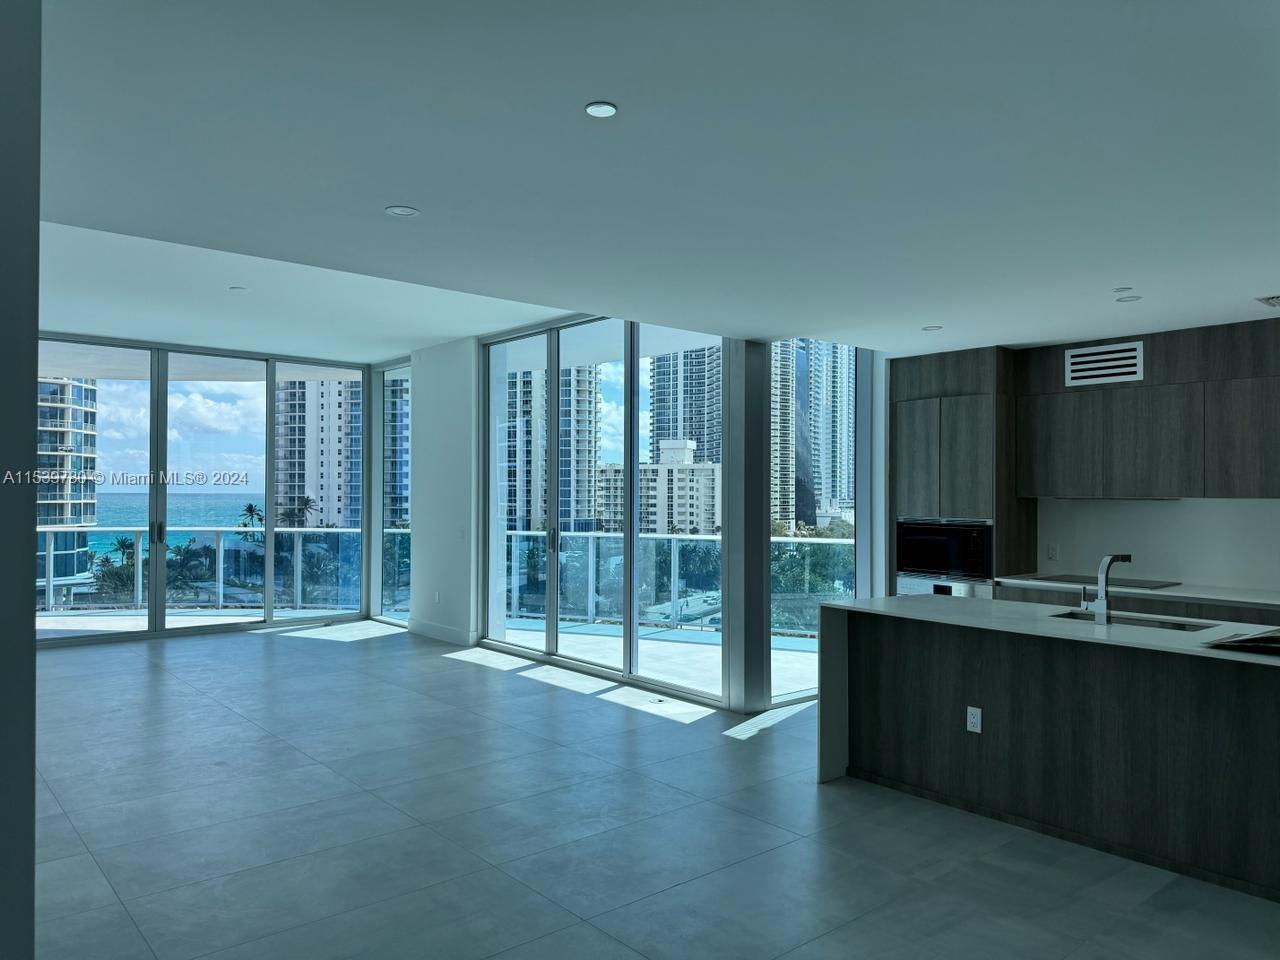 Beautiful and BRAND NEW boutique residence in the heart of Sunny Isles. With floor-to ceiling-windows, private curved terraces, 10’ ceilings, private elevator entry with the elegance of Steven G. Interiors finishes, this new construction apartment has panoramic ocean views, with 3 bedrooms each with their own bathroom. The amenities include pool deck, yoga garden, kid’s zone, fitness center, yoga lounge and beach, concierge and white-glove treatment. All this ins one of the world’s most sought-after destinations, defined by its alluring coastlines and vibrant atmosphere. Aventura Mall and Bal Harbour only a short ride away.